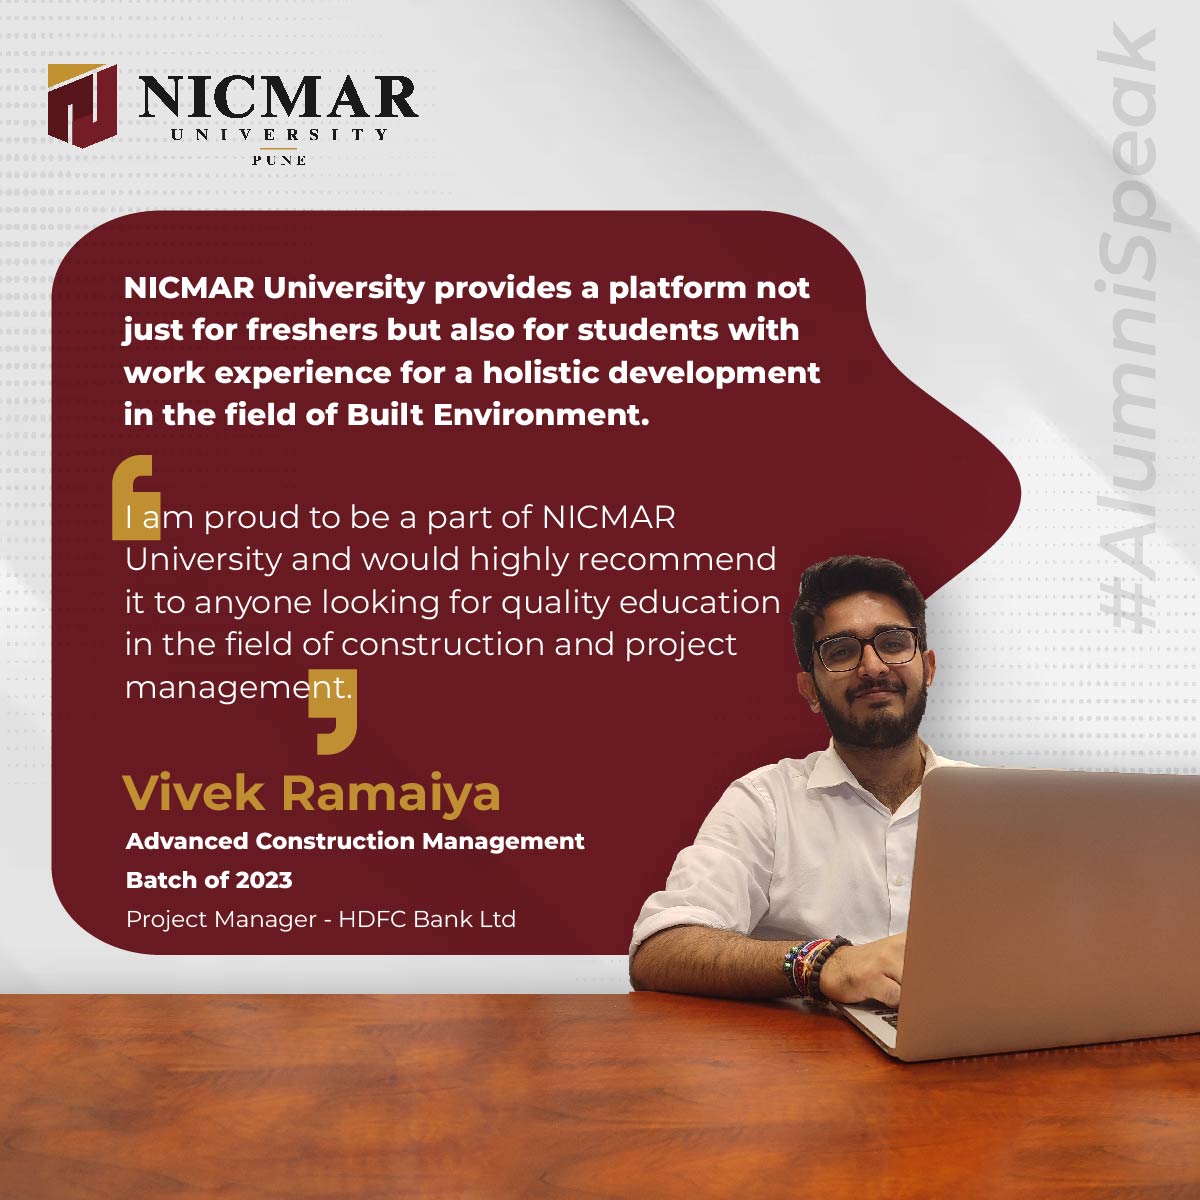 NICMAR University, Pune graduate Vivek Ramaiya thrives as a Project Manager at HDFC Bank! He credits NICMAR's #ConstructionManagement & #HolisticDevelopment for his success. Highly recommends!

#NICMARUniversity #RecommendedProgramme